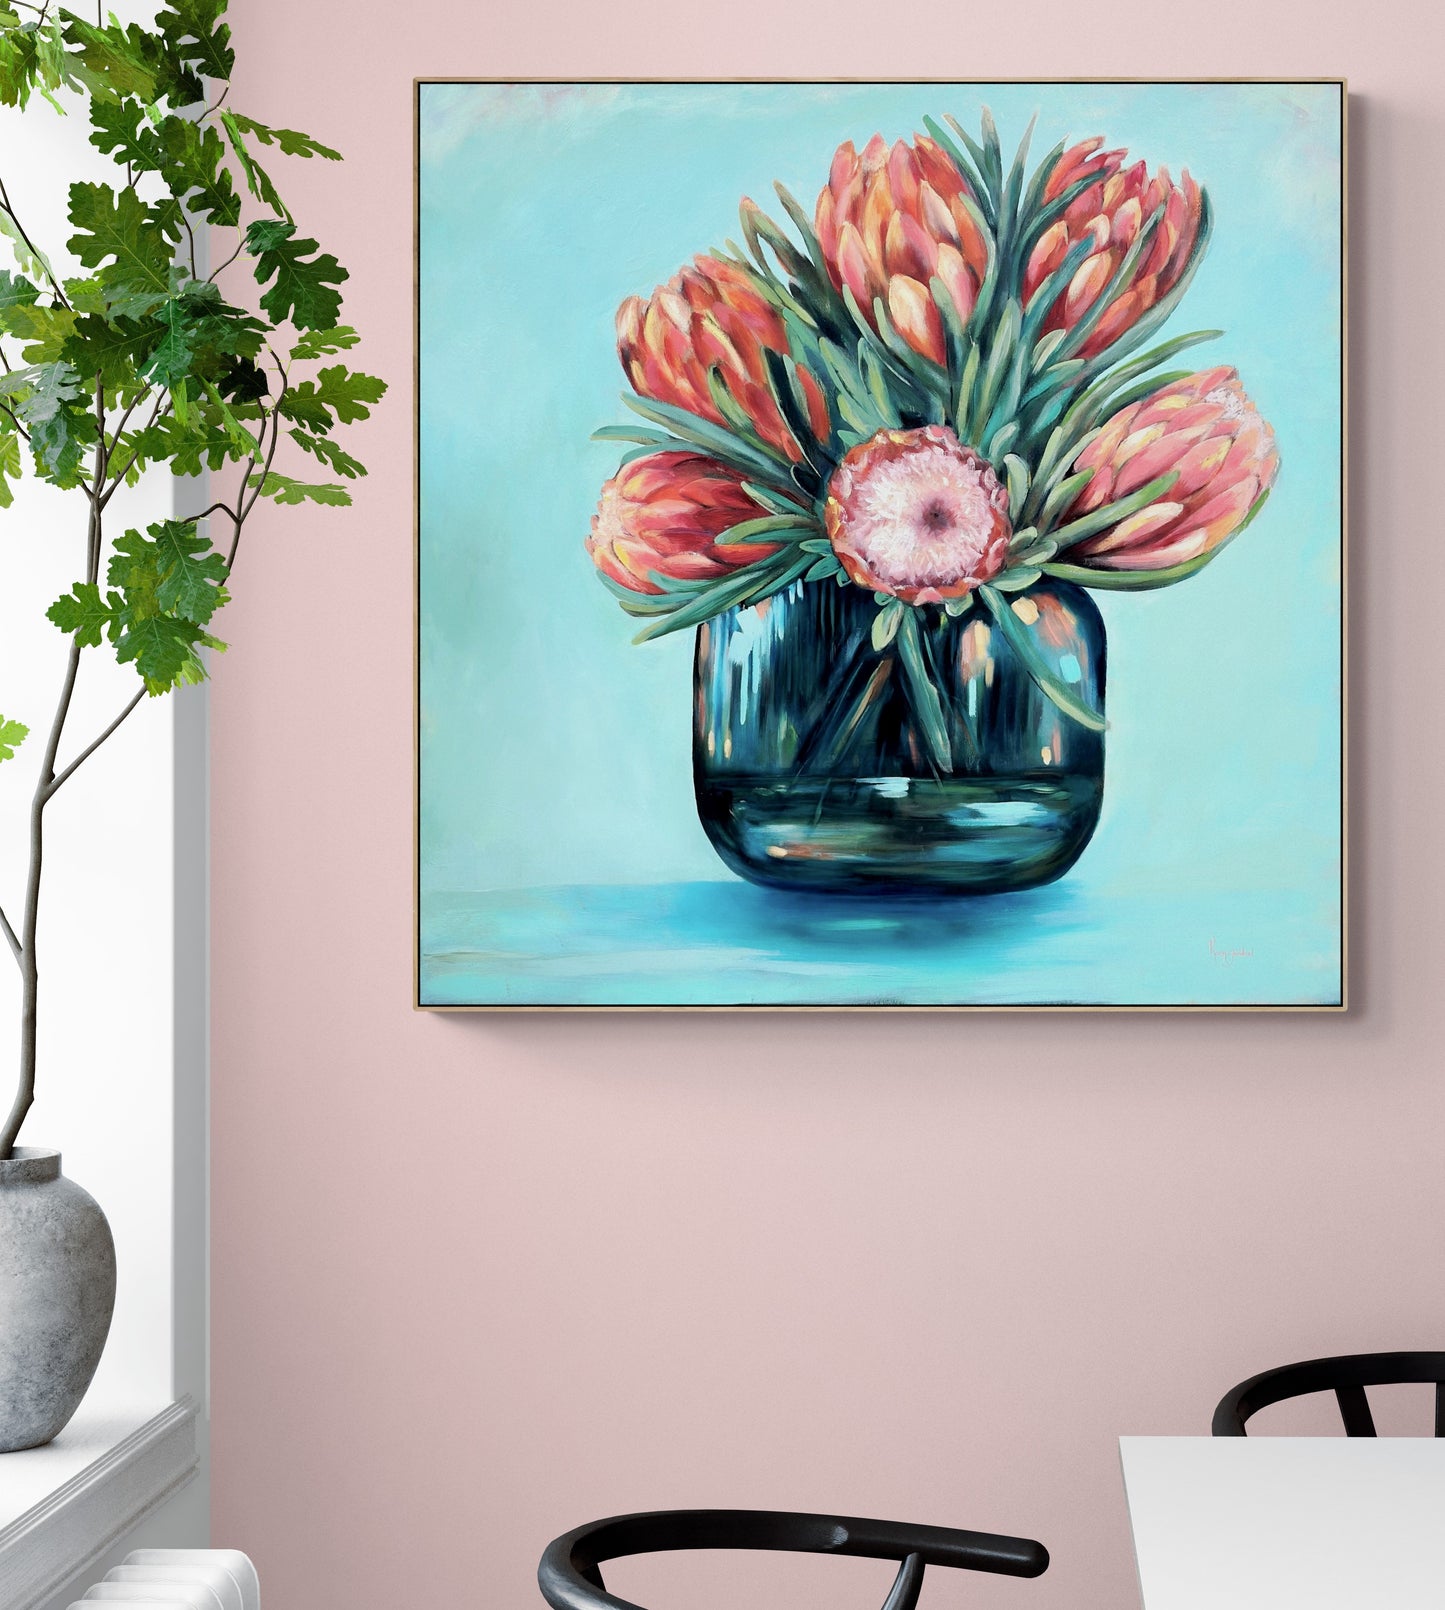 Proteas in teal light - Limited edition print